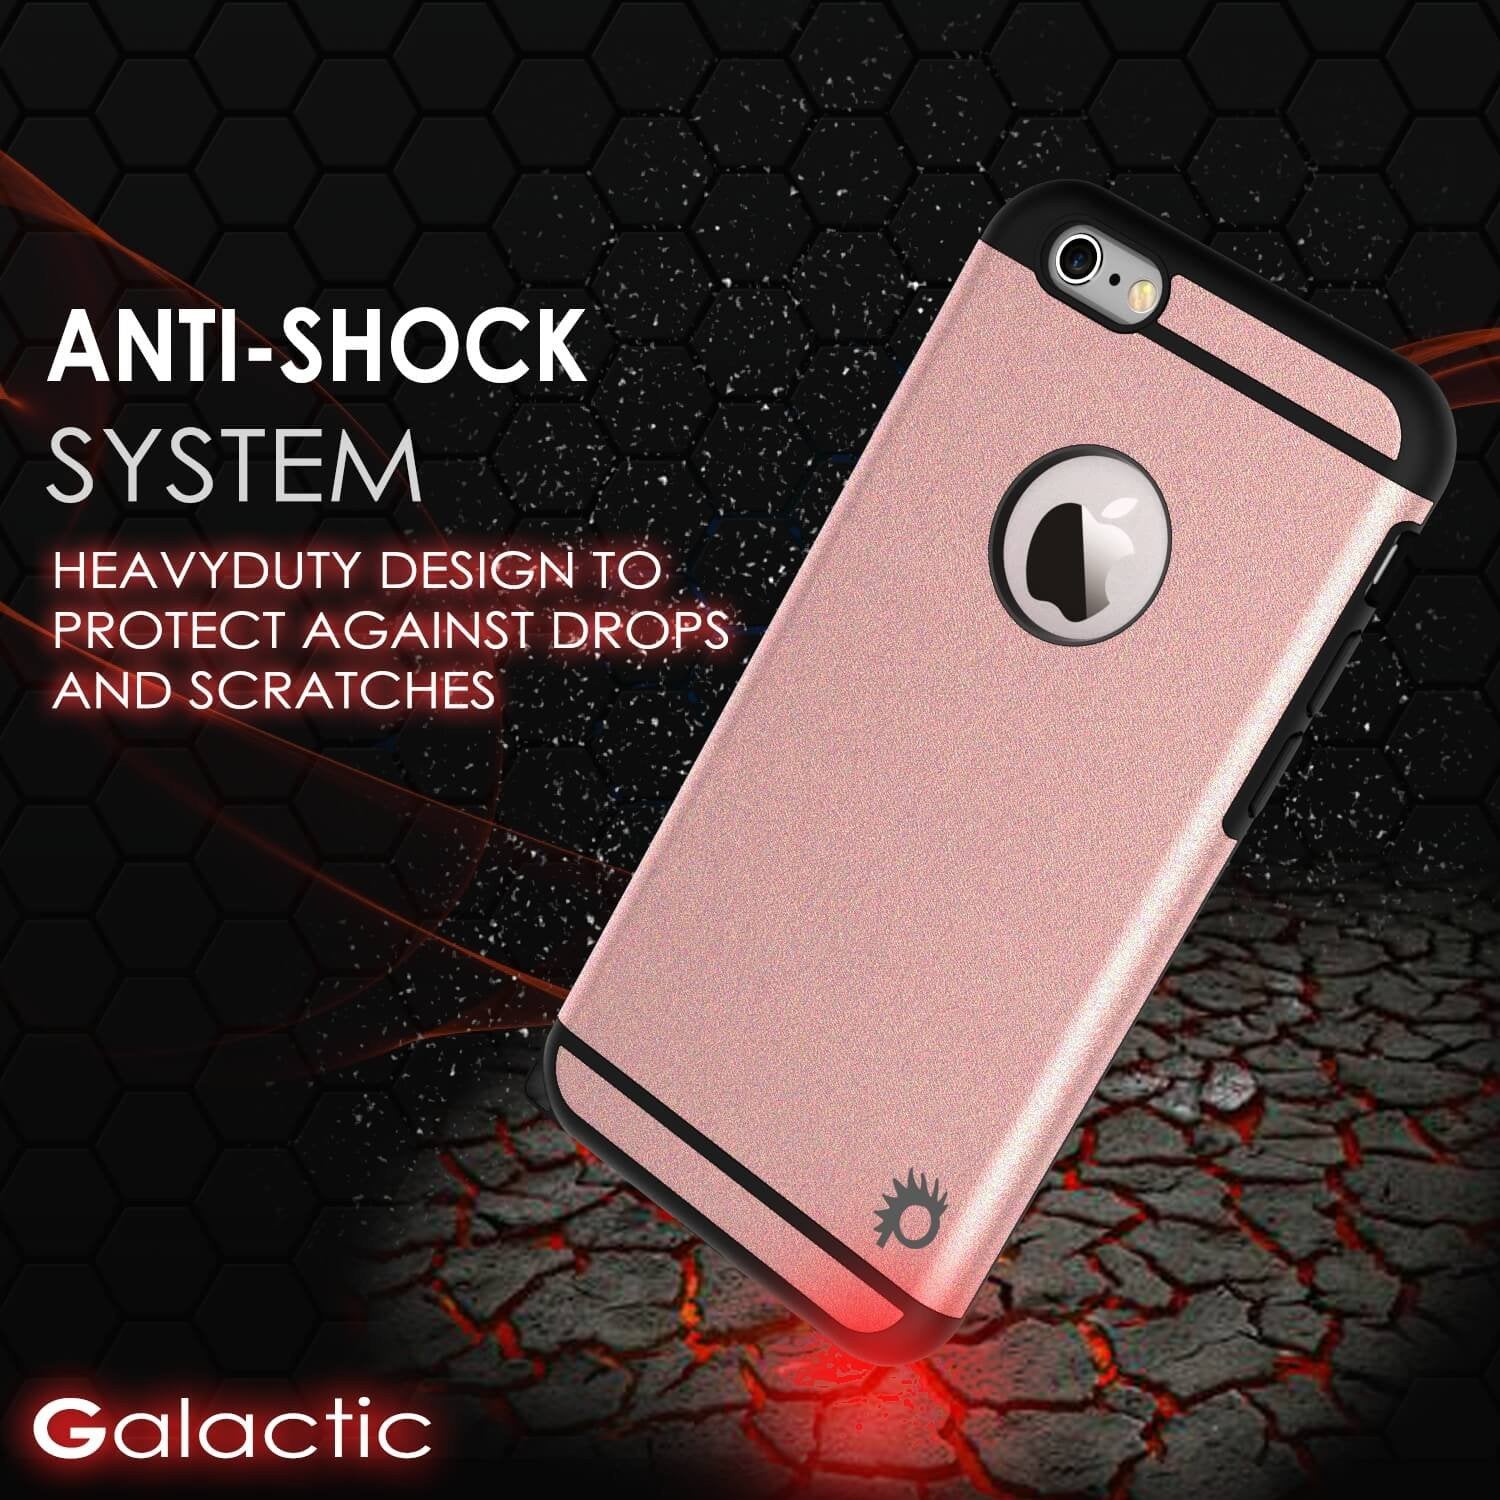 iPhone 6s Plus/6 Plus  Case PunkCase Galactic Rose Gold Slim w/ Tempered Glass | Lifetime Warranty